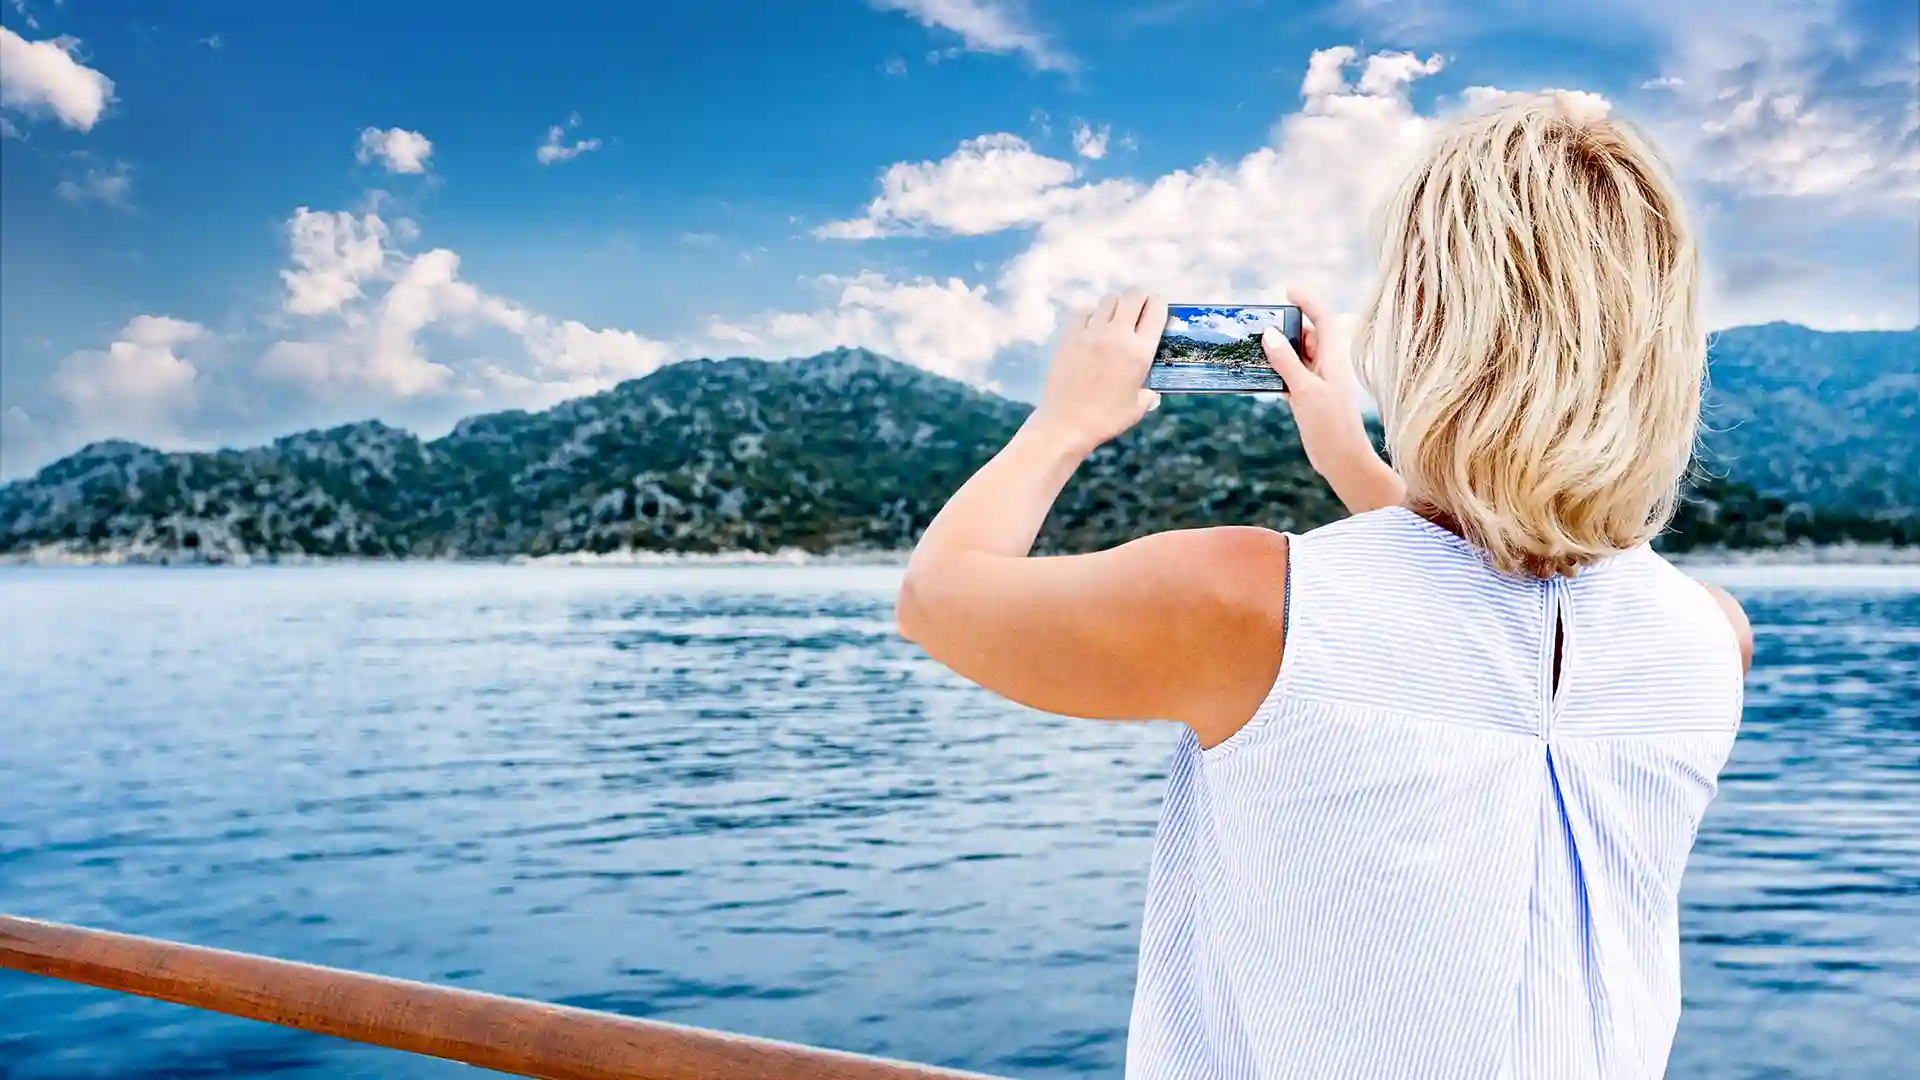 View of person taking photos of landscape from deck of cruise ship.